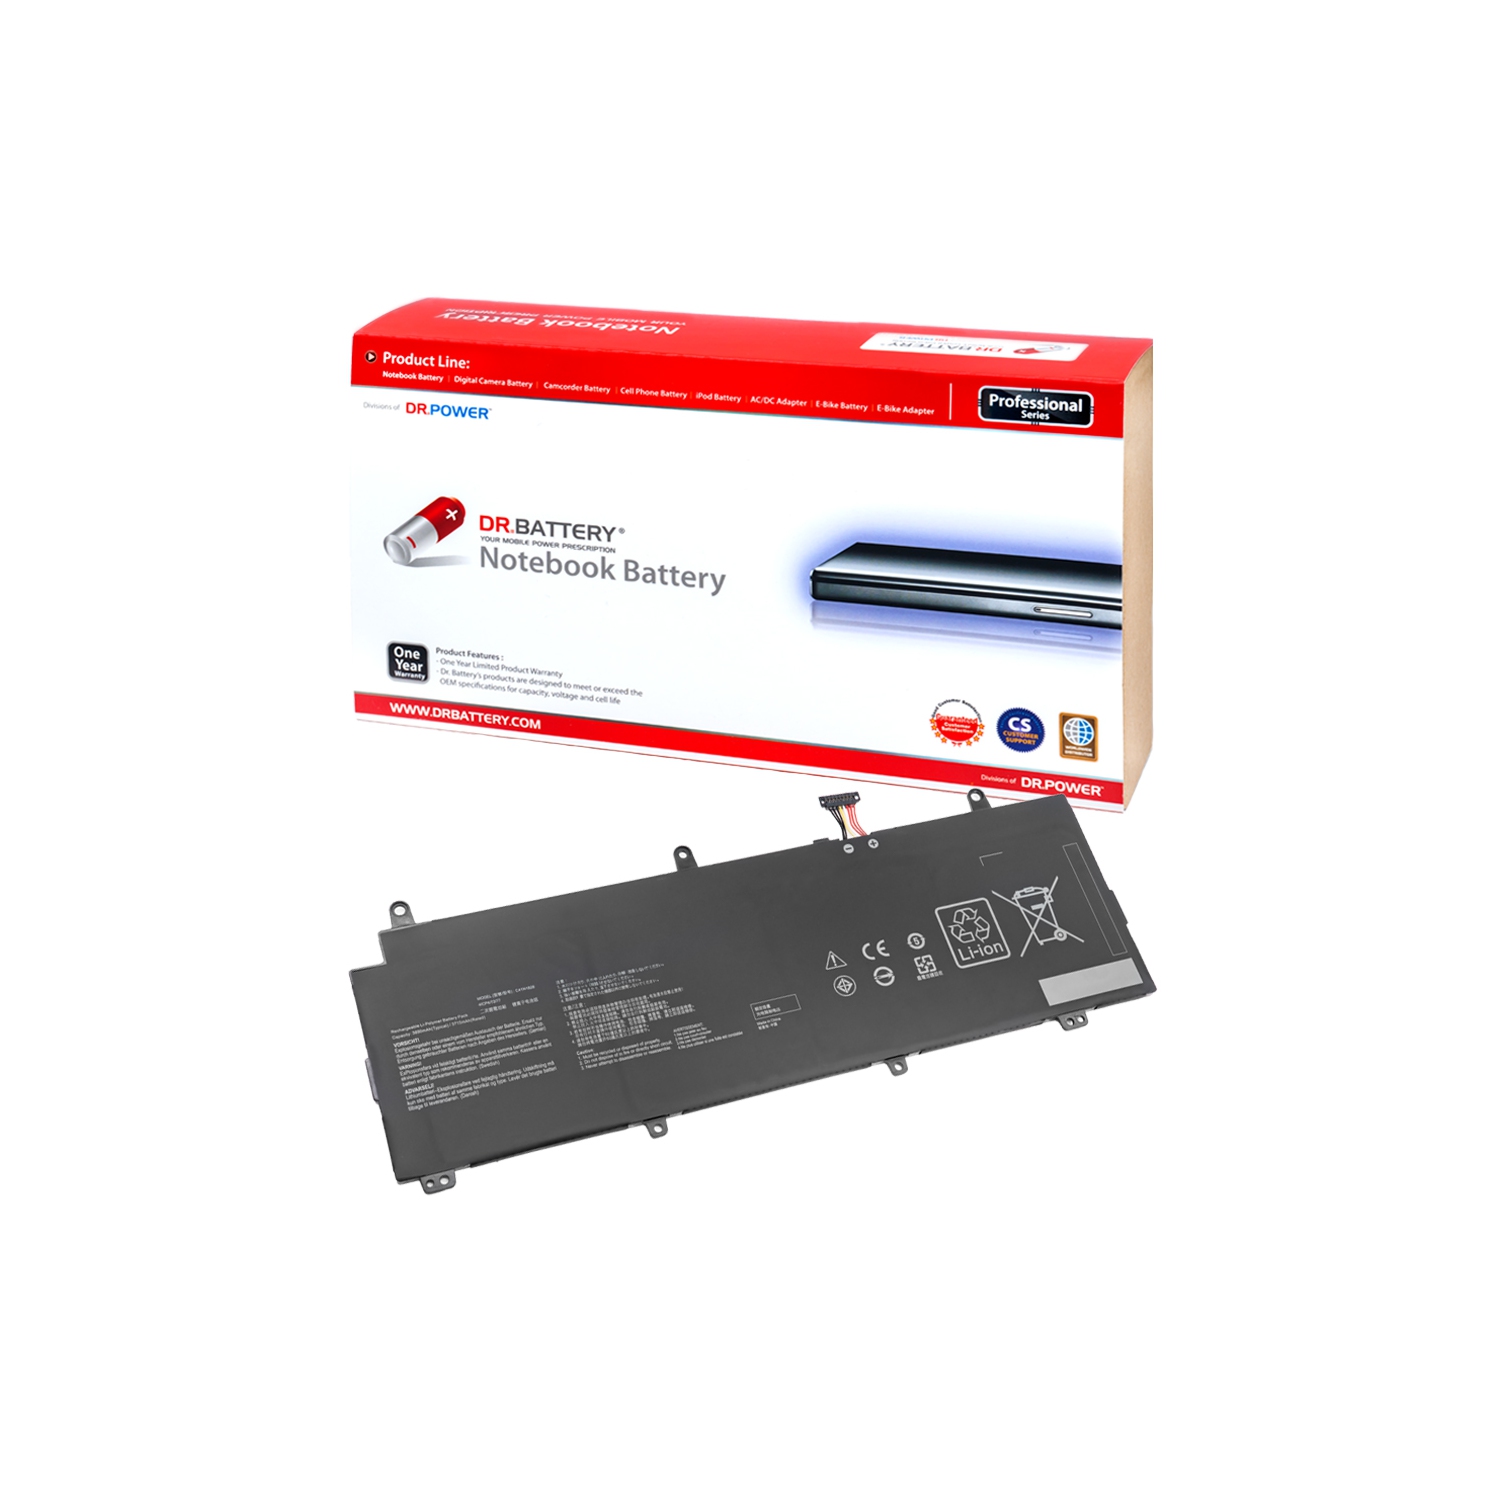 DR. BATTERY - Replacement for Asus ROG Zephyrus S GX531GV-ES003T / GX531GV-ES007T / GX531GV-ES017T / 77 / 0B200-03020200 [15.44V / 3886mAh / 60Wh] *** Free Shipping***